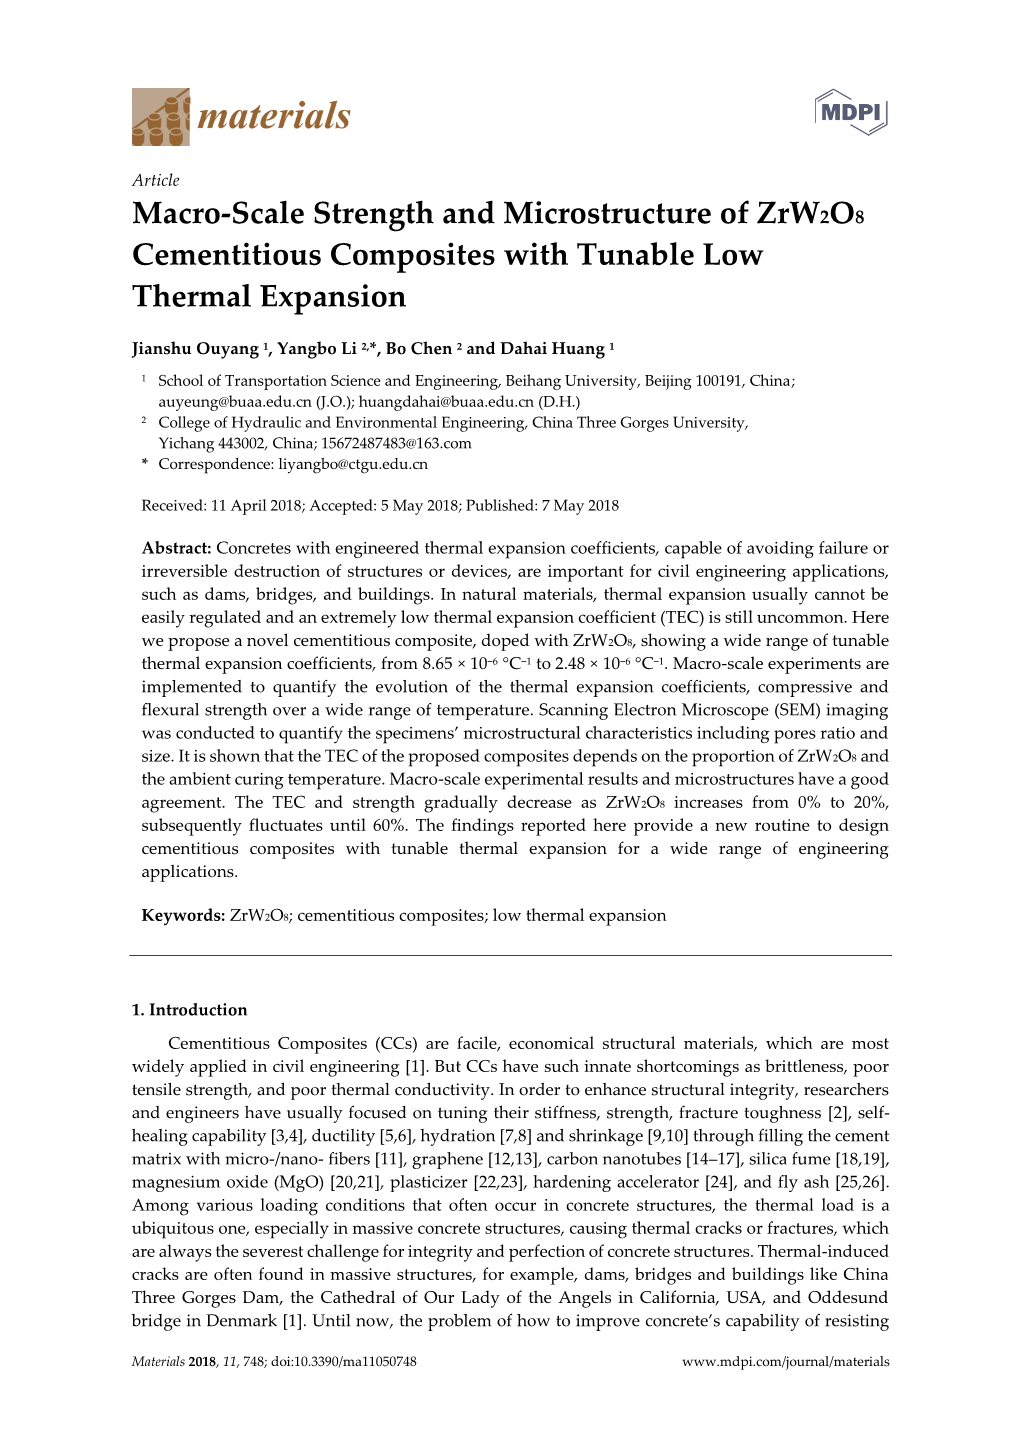 Macro-Scale Strength and Microstructure of Zrw2o8 Cementitious Composites with Tunable Low Thermal Expansion